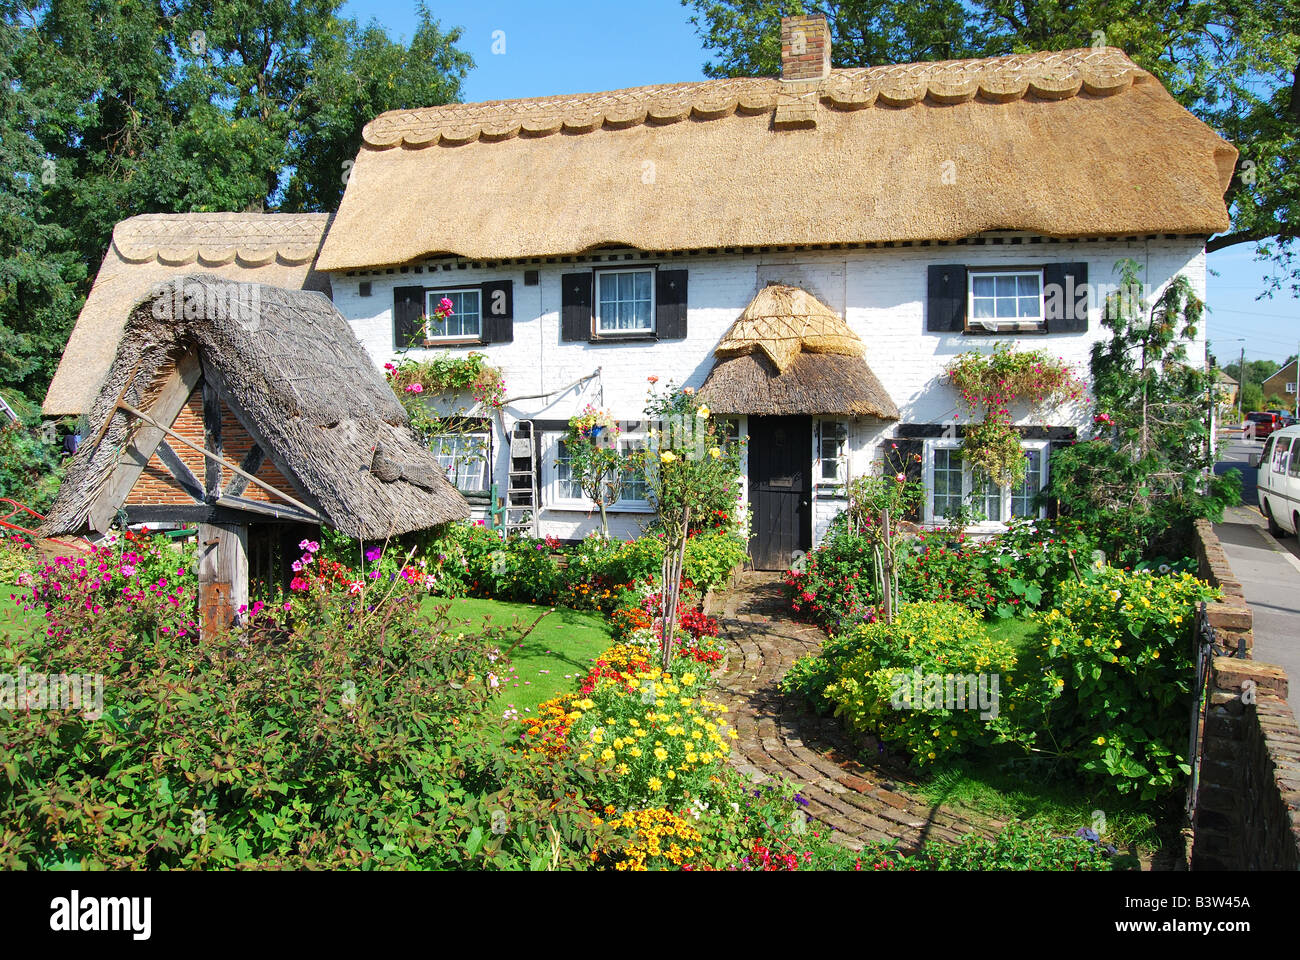 Thatched cottage and garden, Longford Village, London Borough of Hillingdon, Greater London, England, United Kingdom Stock Photo